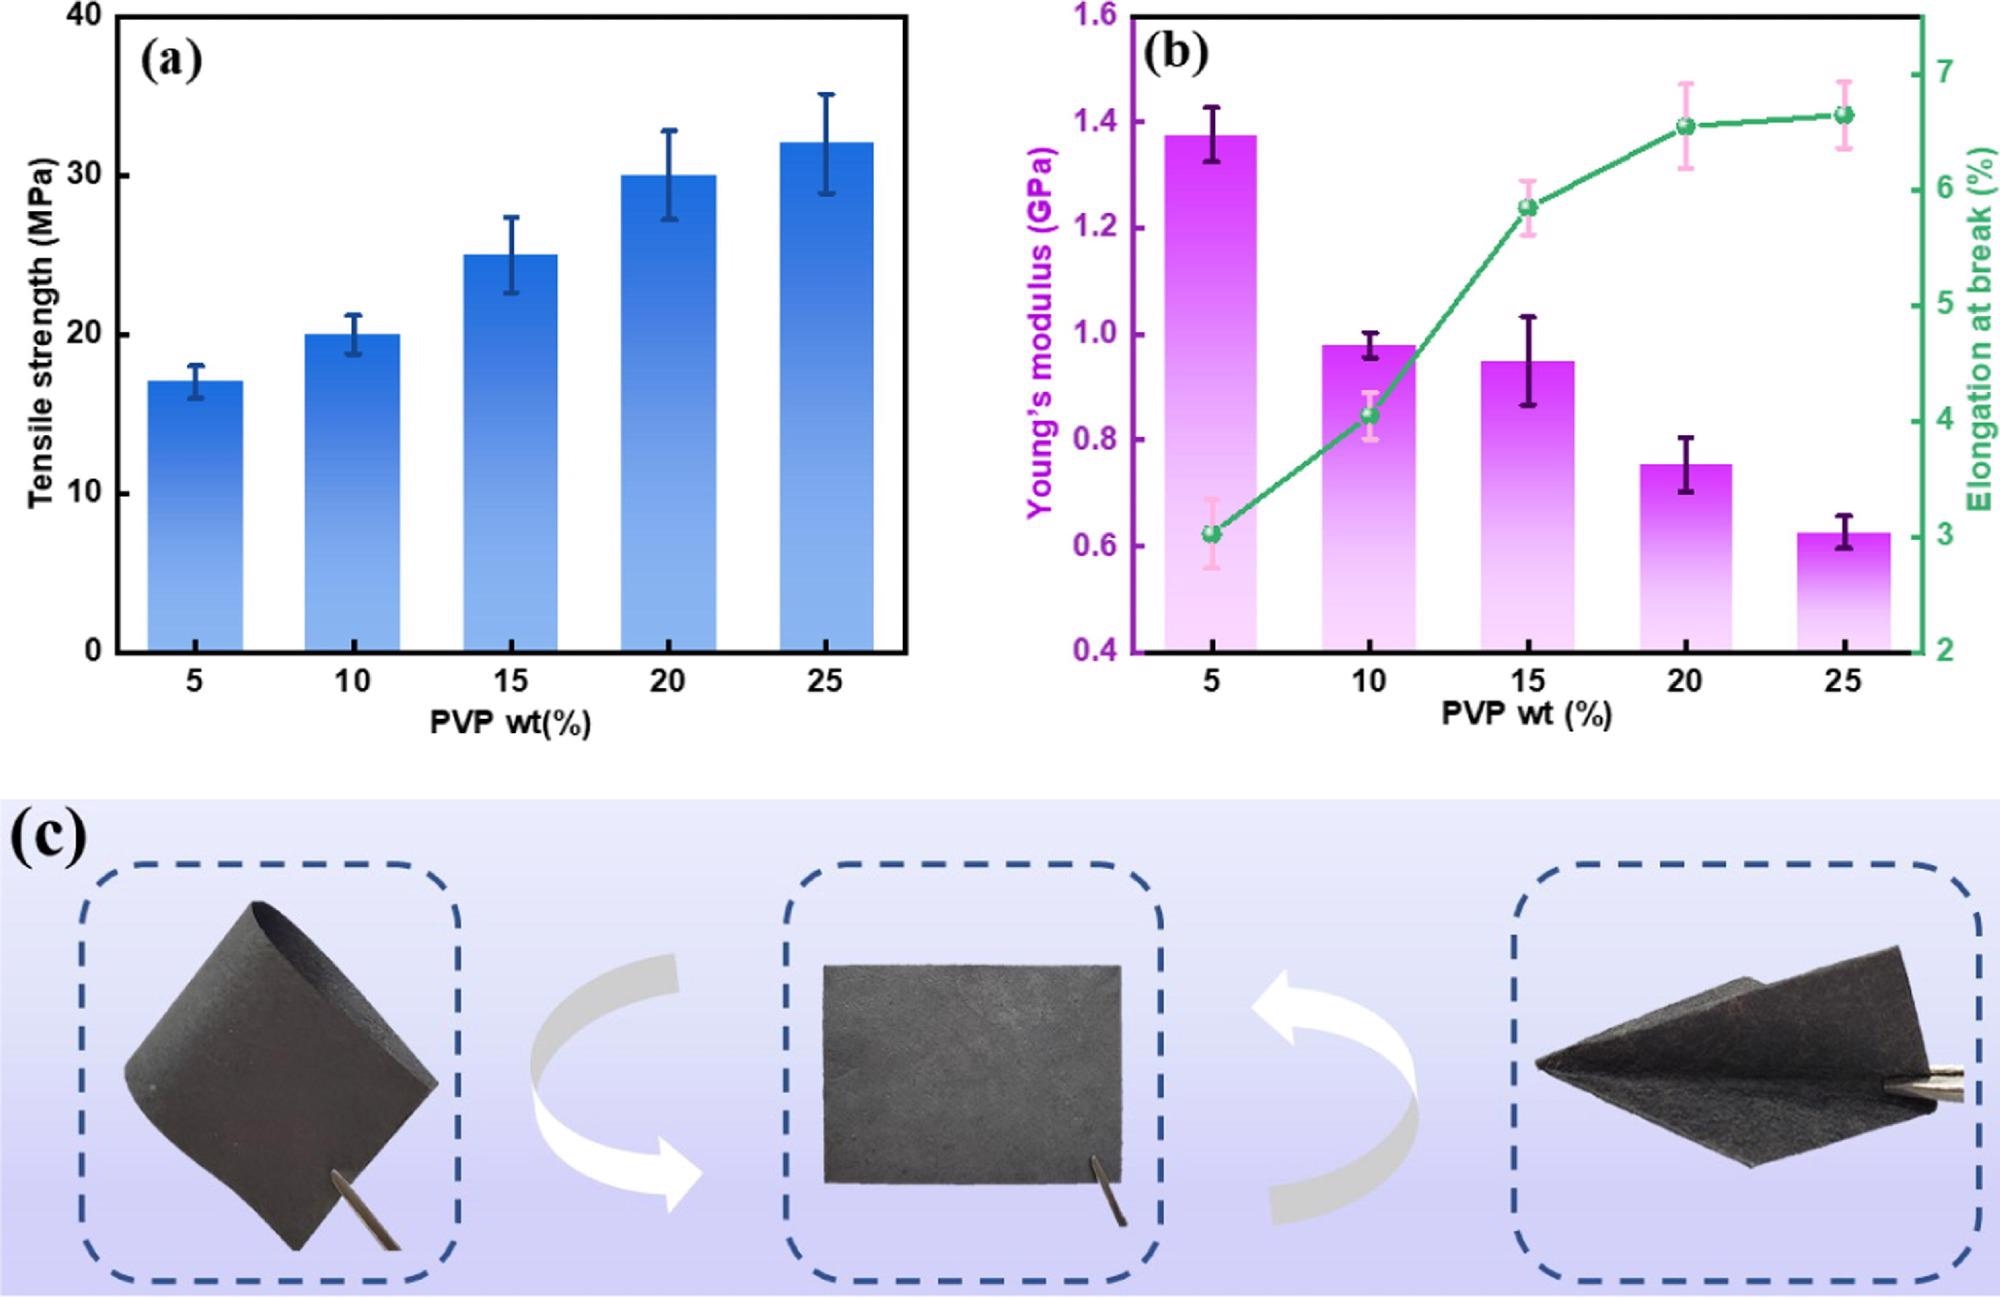 (a) Influence of PVP content on the tensile strength of 20 g/m2 graphene/AgNPs-coated CAFP. (b) Influence of PVP content on the Young’s modulus and the elongation at break of 20 g/m2 graphene/AgNPs-coated CAFP (c) Images depicting the flexibility of the material.